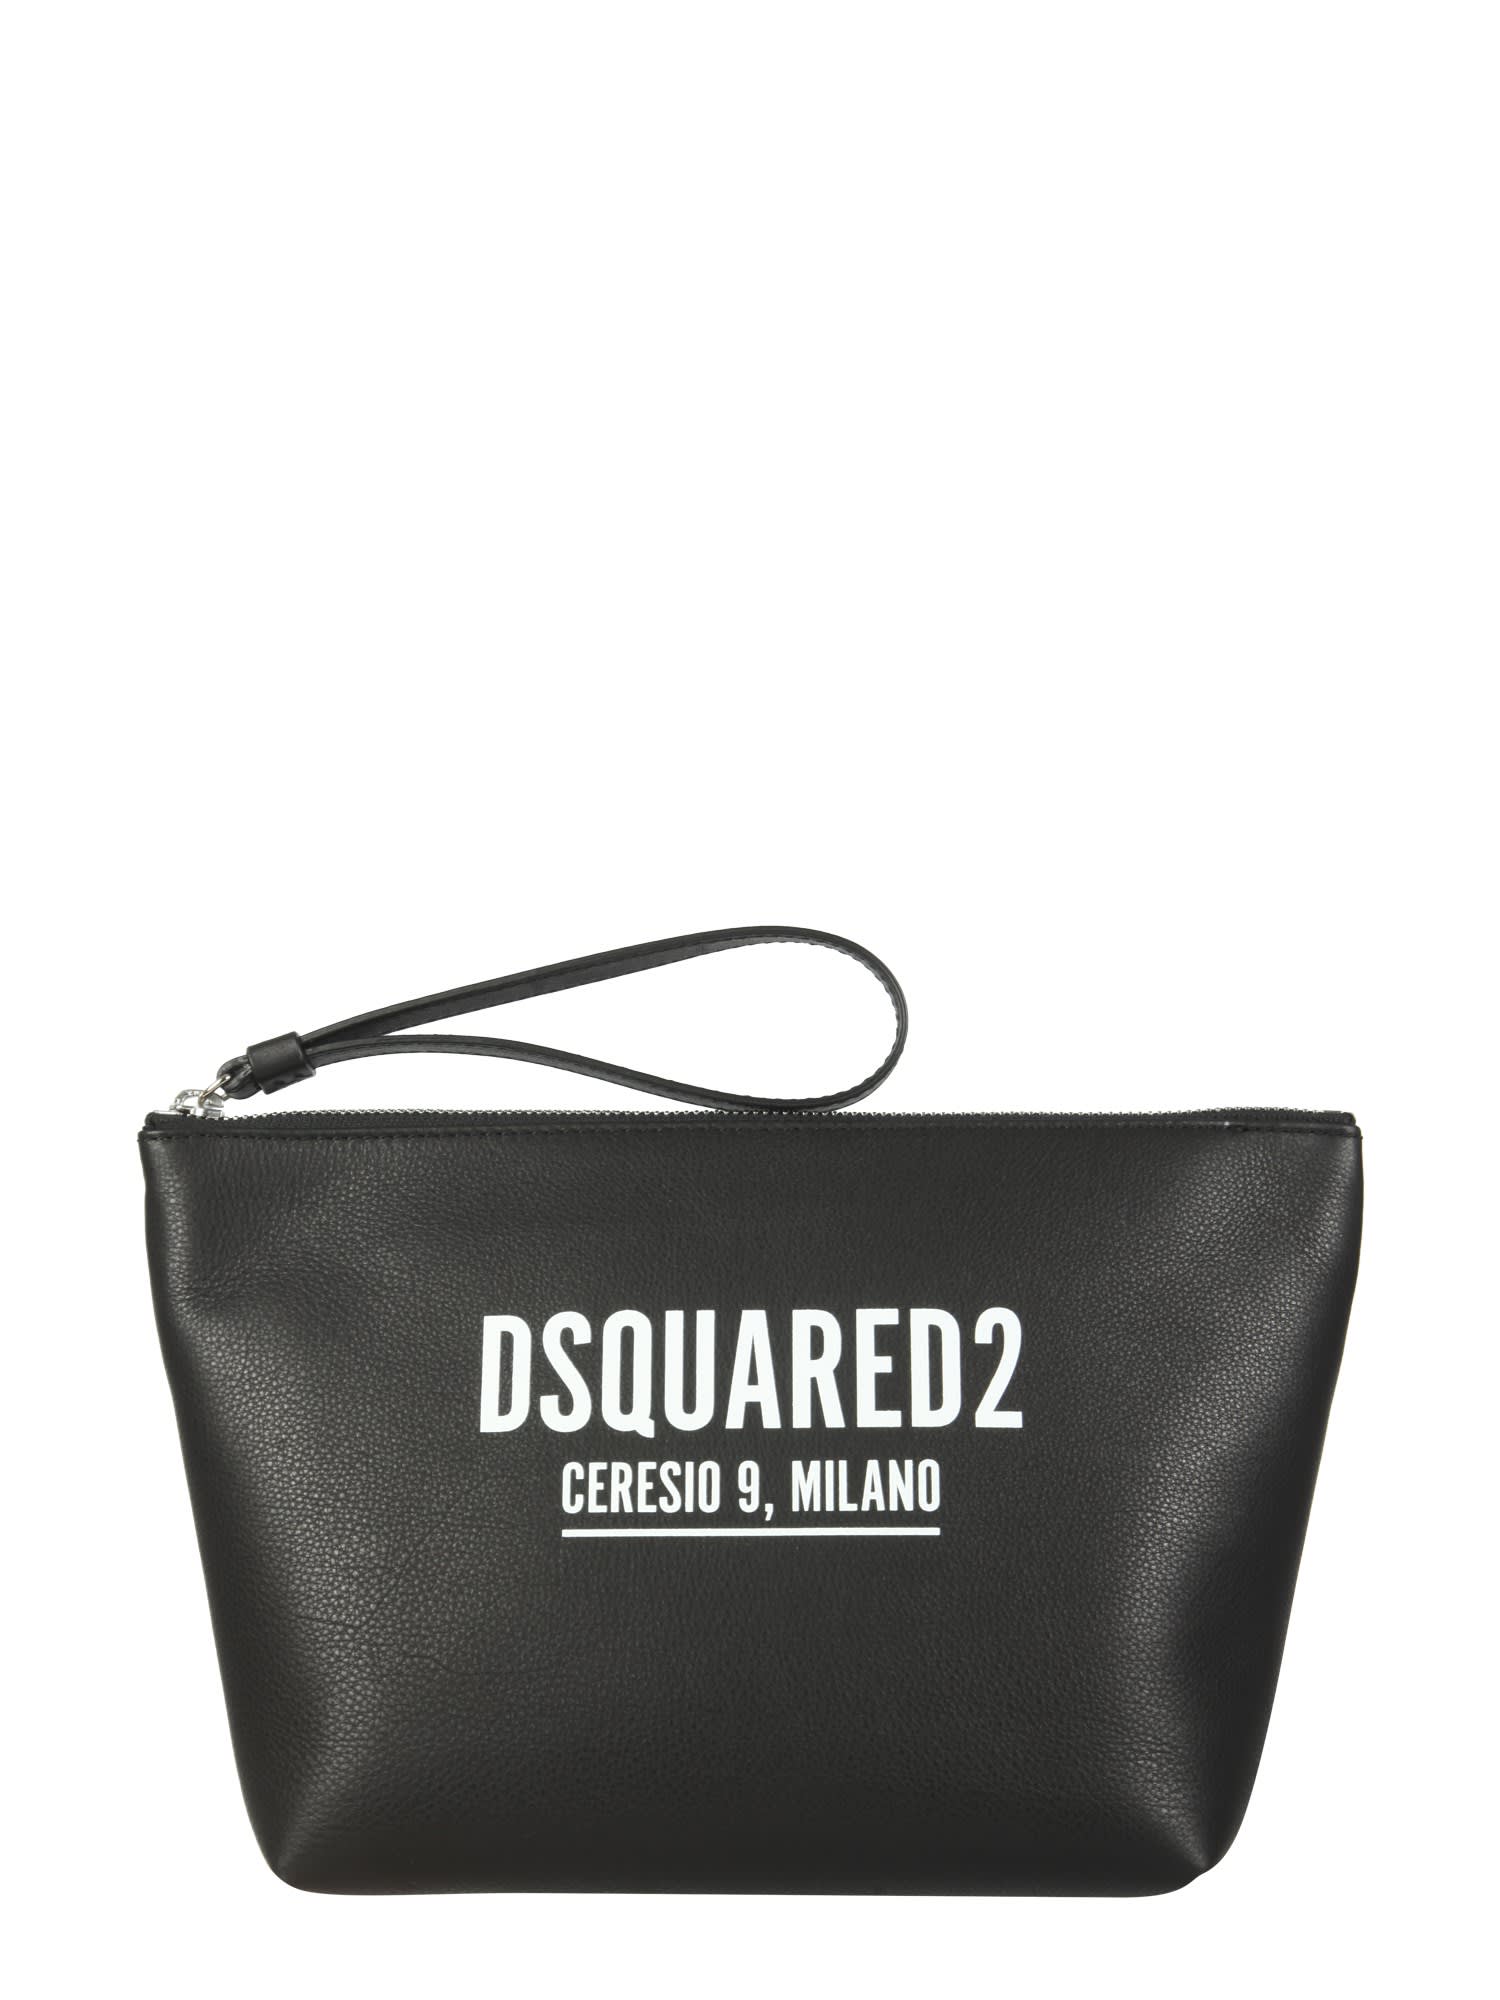 Dsquared2 Beauty Case With Ceresio Logo Print 9